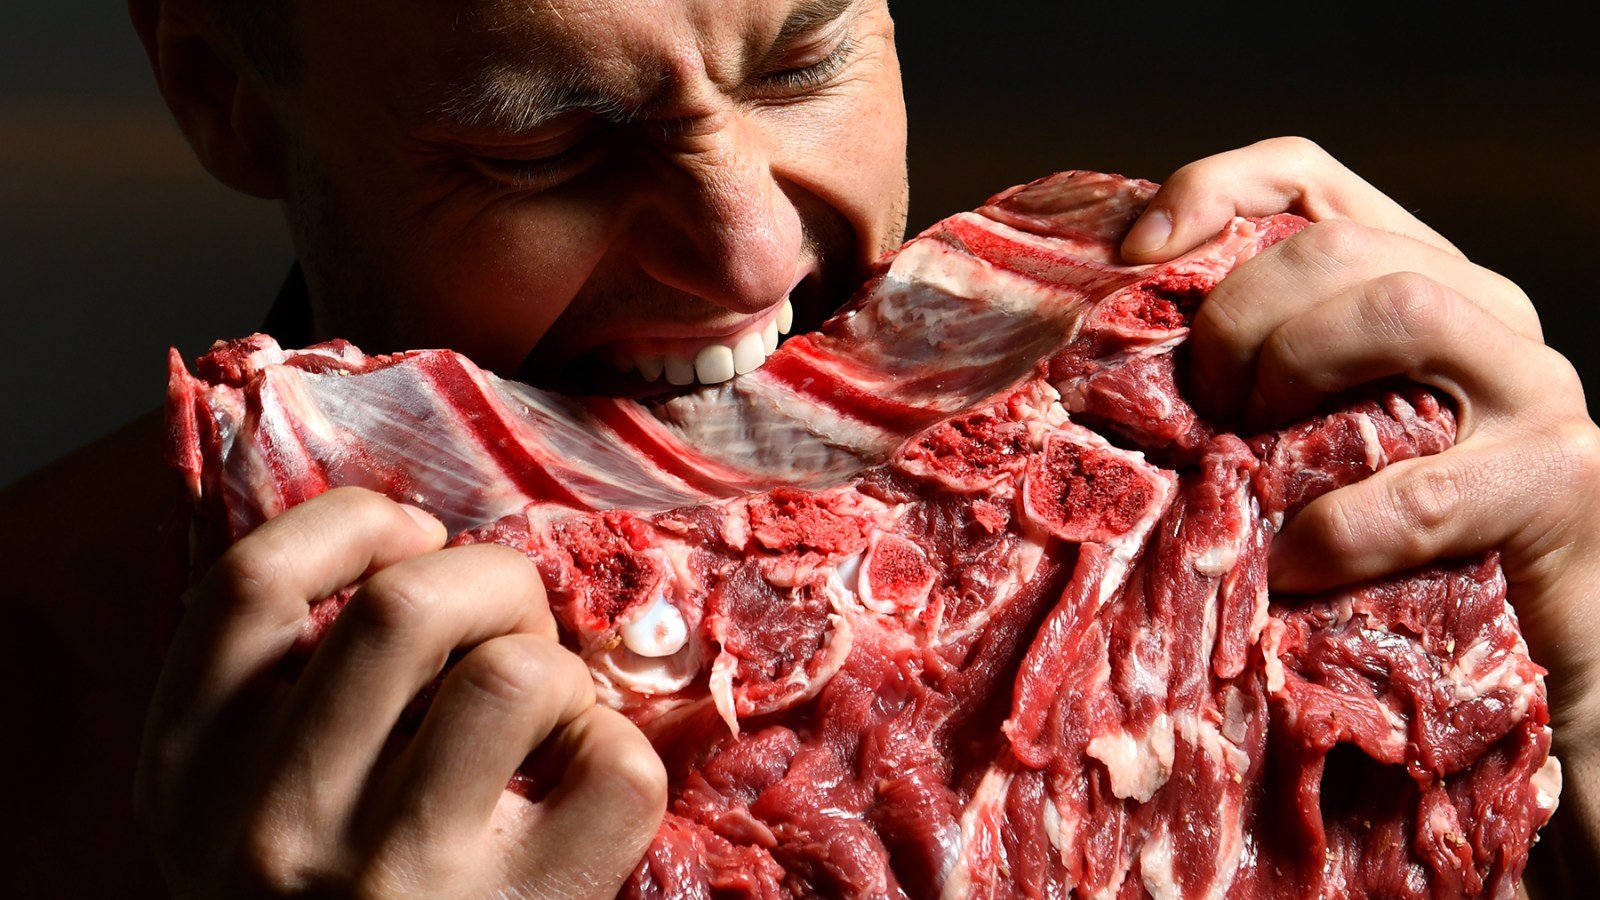 The Viral Carnivore Diet Isn't About Raw Meat. It's About Power